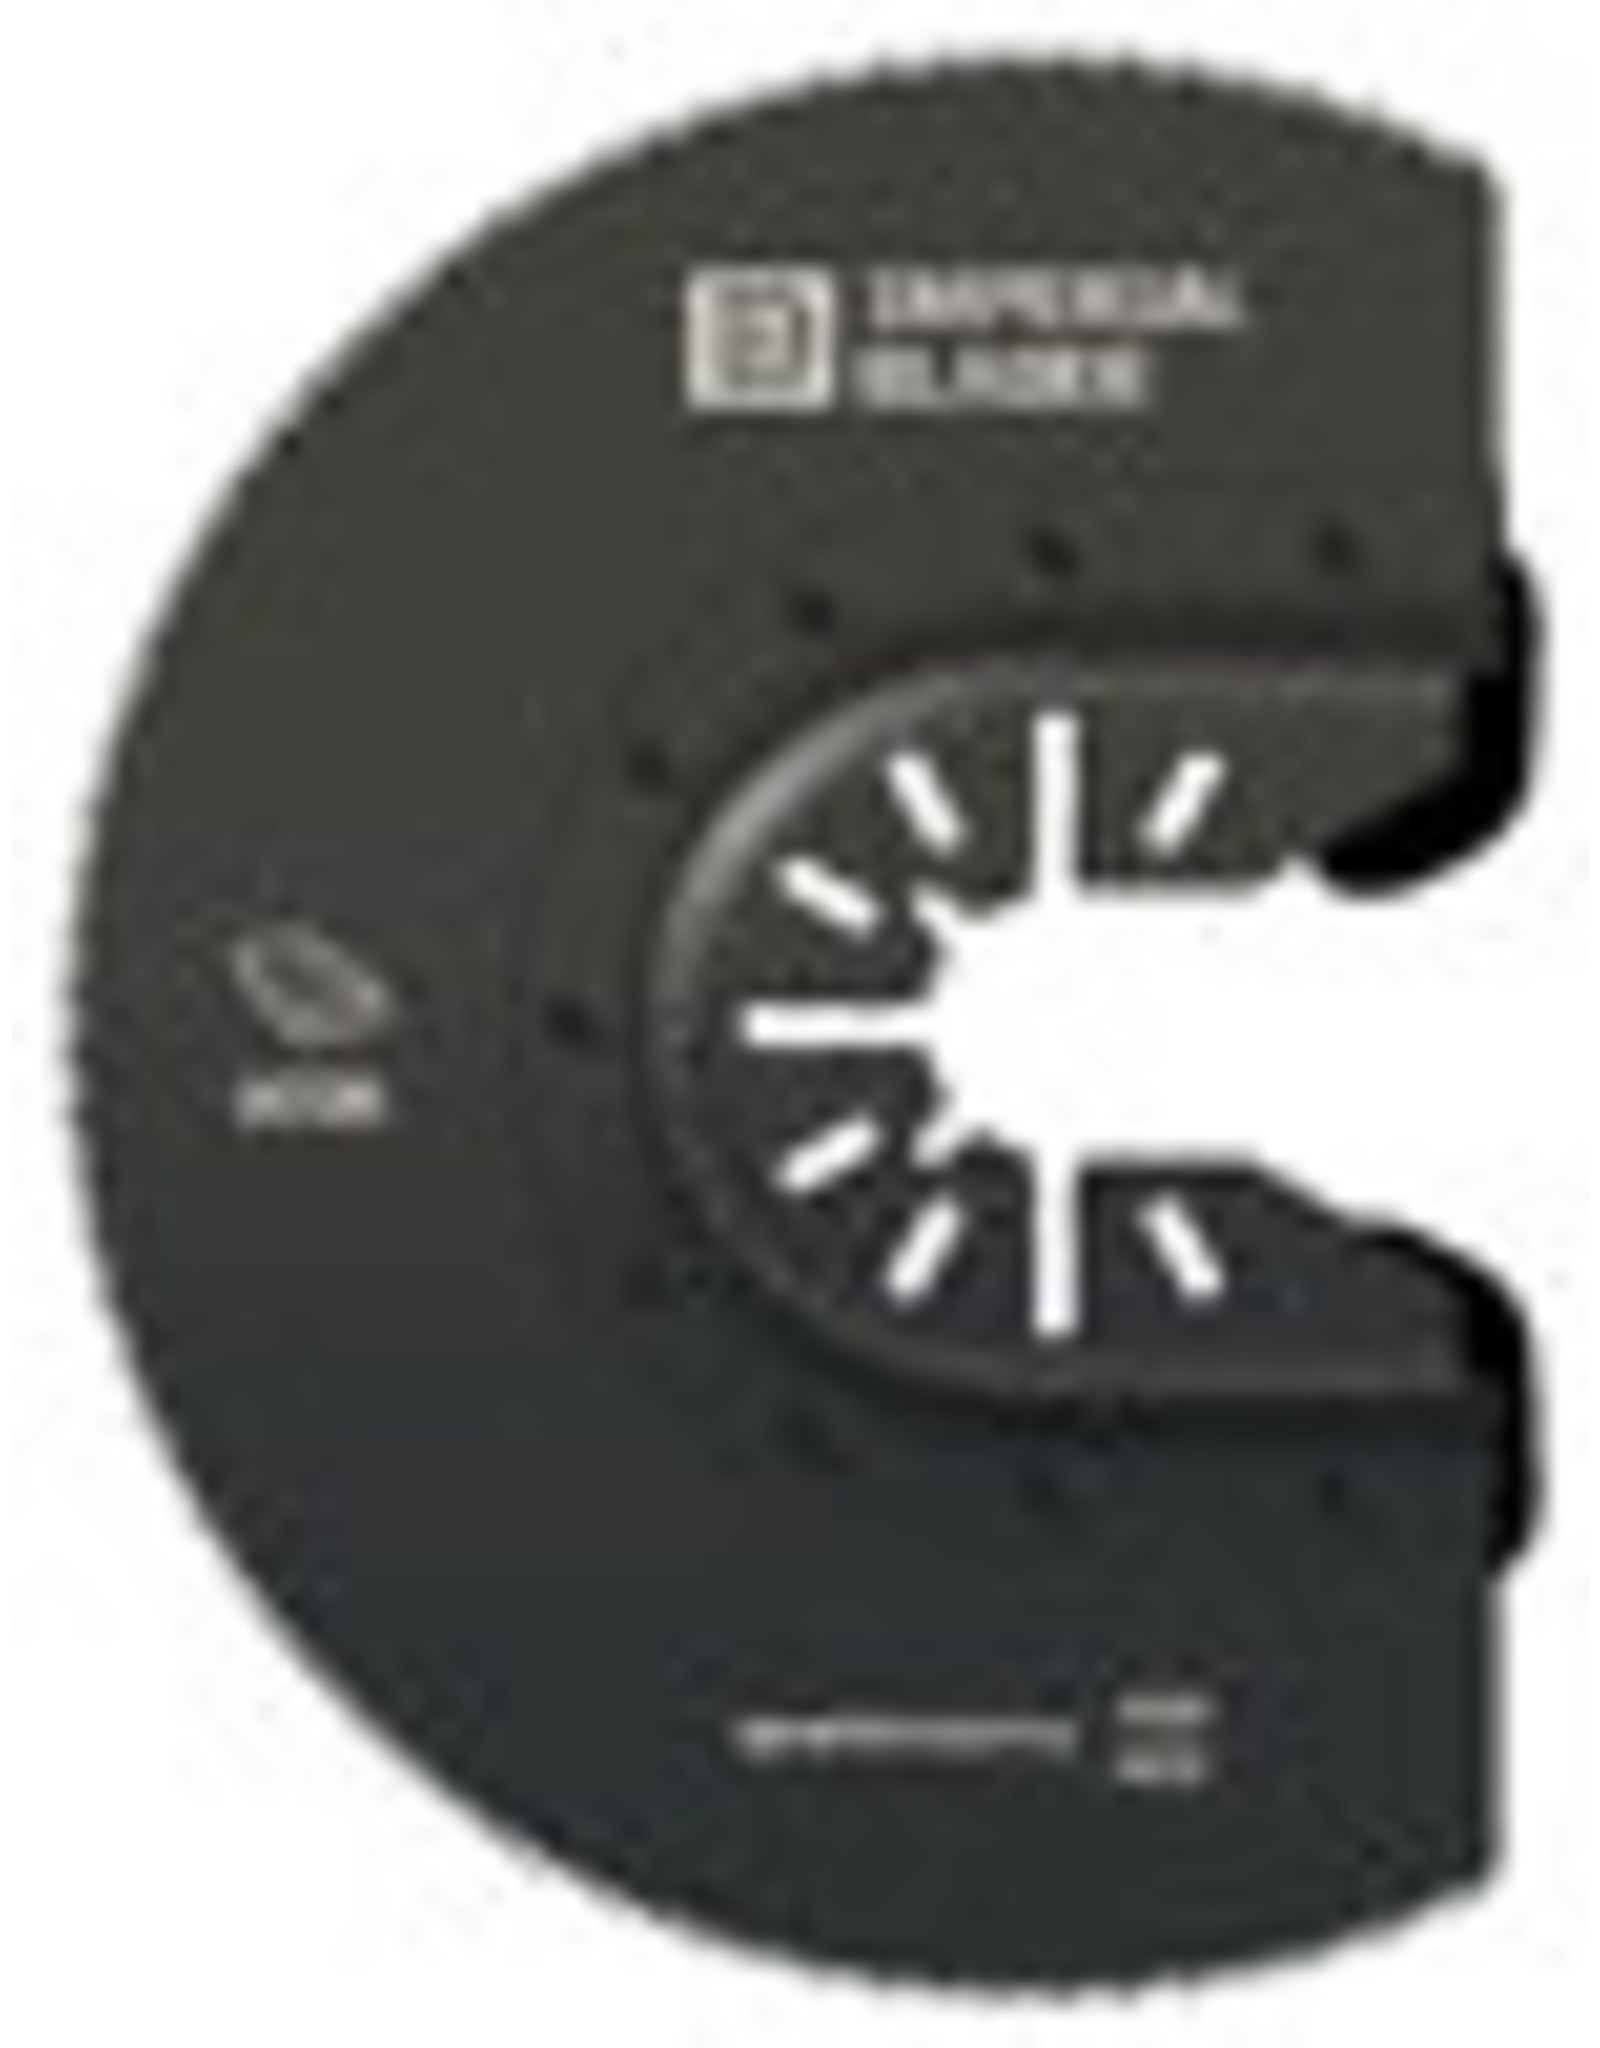 Imperial Blades IMPERIAL BLADES ONE FIT IBOA400-1 Fast Cut Segment Blade, 3-1/2 in, High Carbon Steel